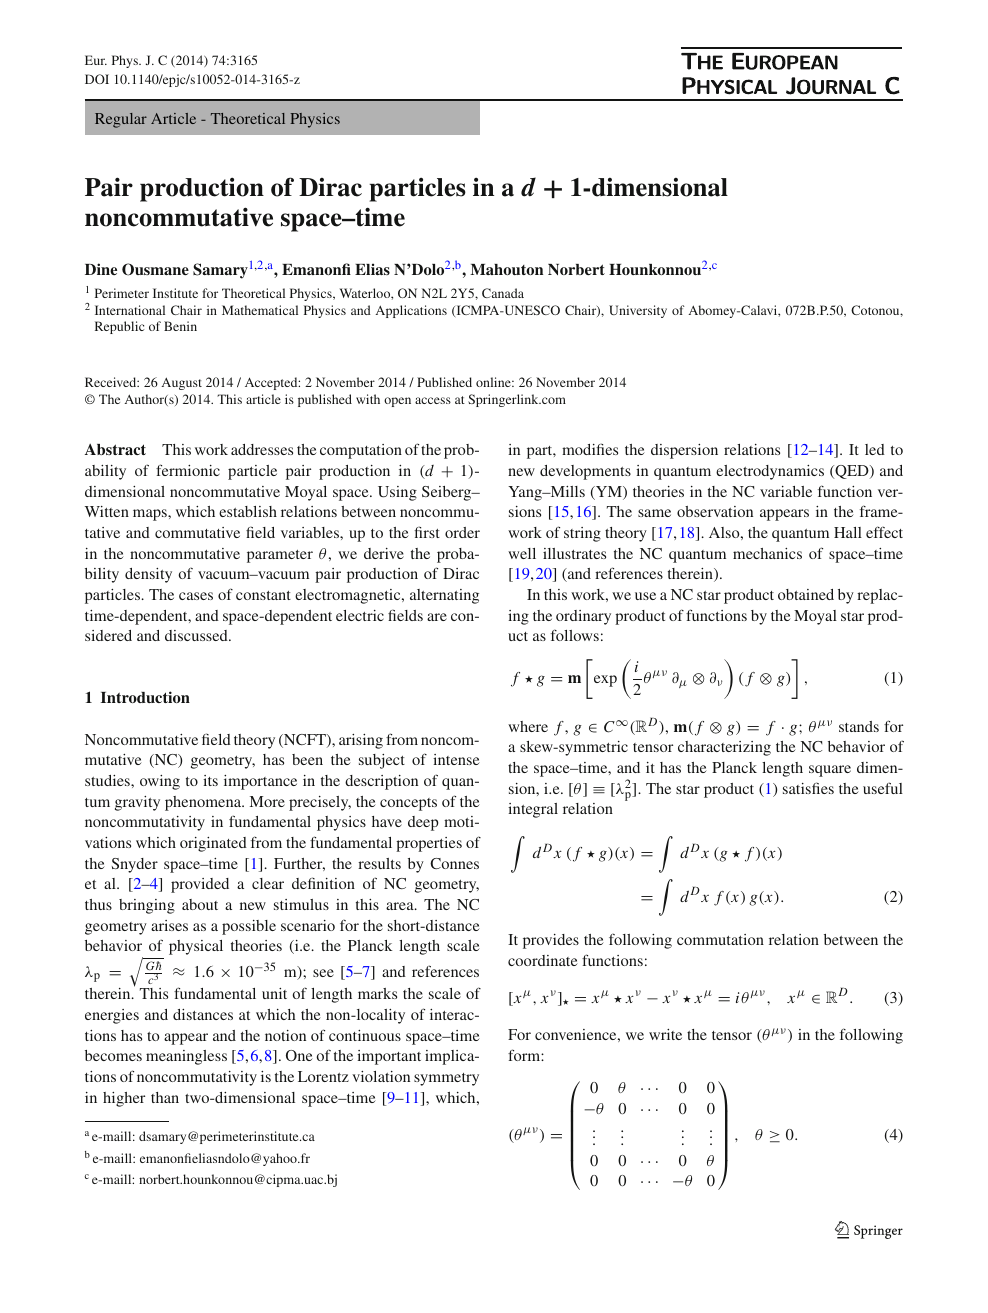 Pair Production Of Dirac Particles In A D 1 D 1 Dimensional Noncommutative Space Time Topic Of Research Paper In Physical Sciences Download Scholarly Article Pdf And Read For Free On Cyberleninka